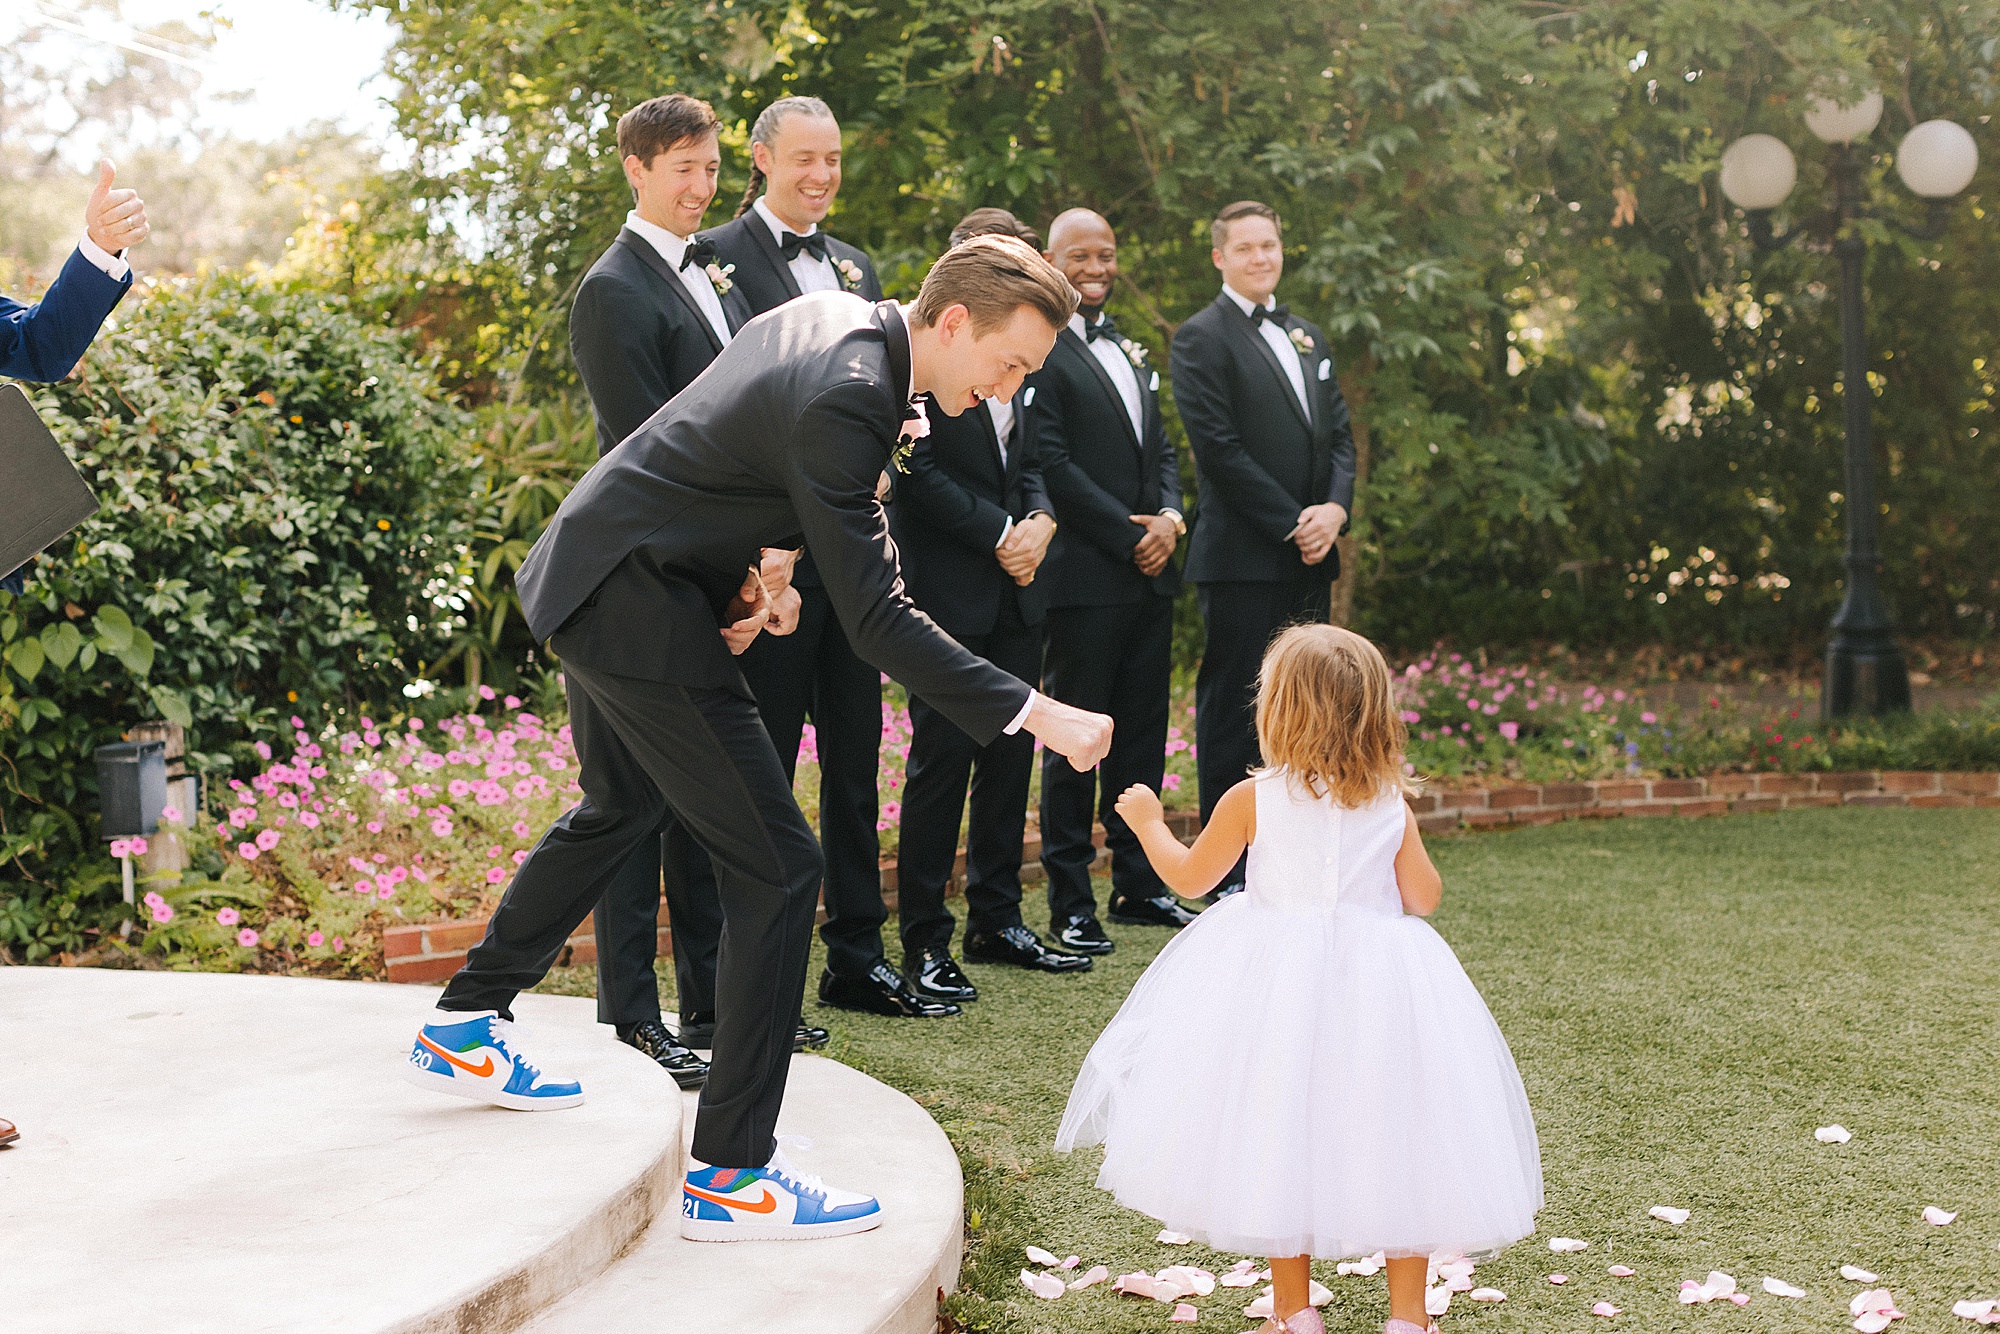 flowers girl gives groom a first bump during outdoor wedding ceremony in Florida